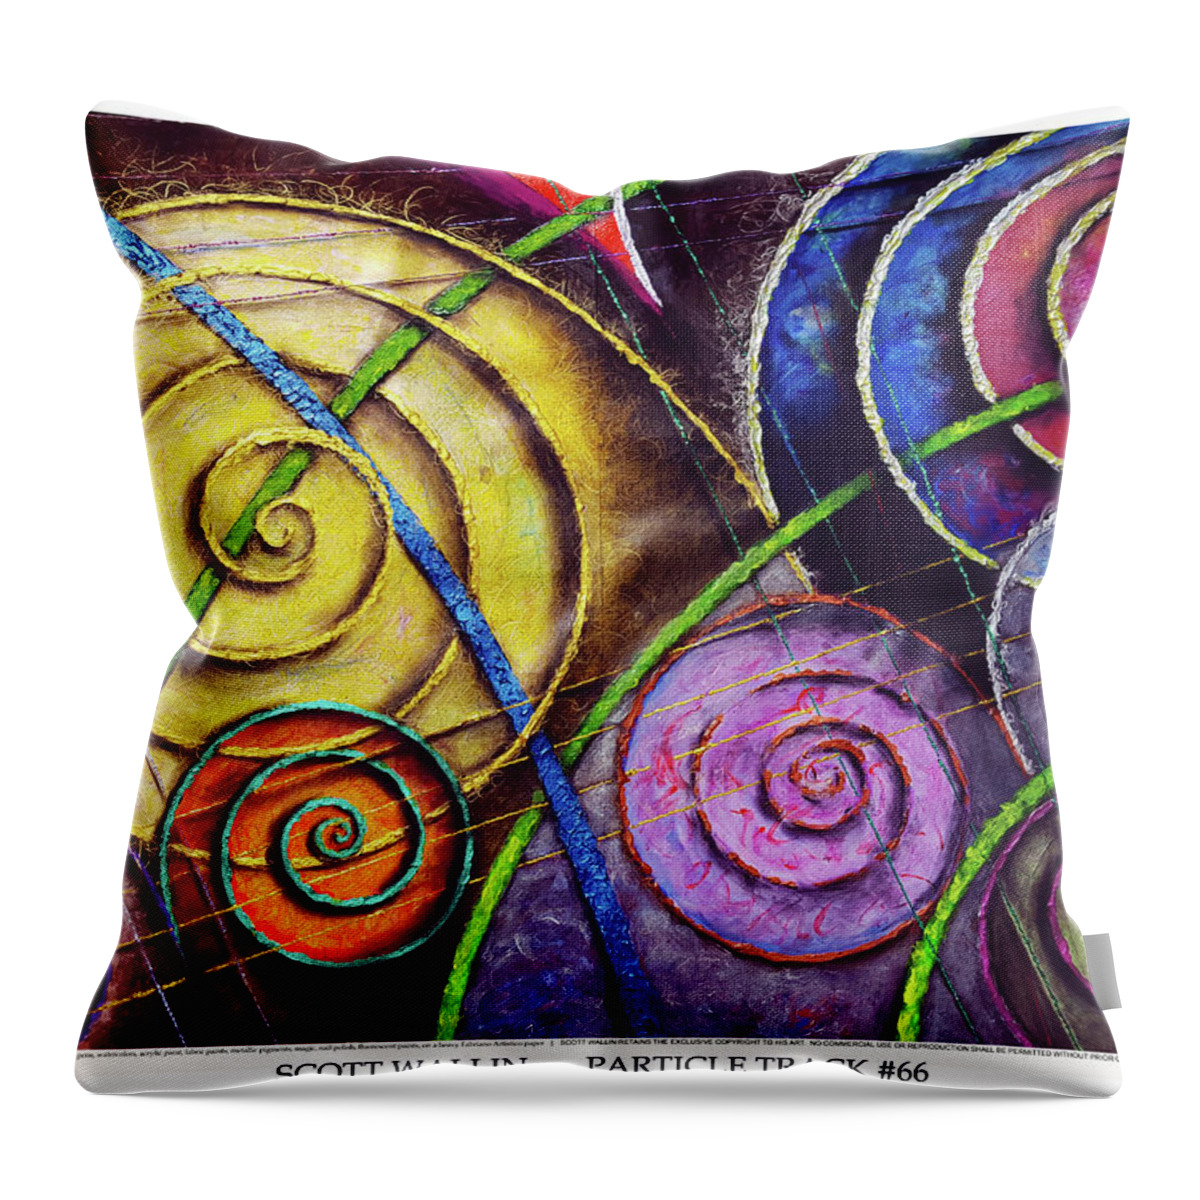 The Particle Track Series Is A Bright Throw Pillow featuring the painting Particle Track Sixty-six by Scott Wallin